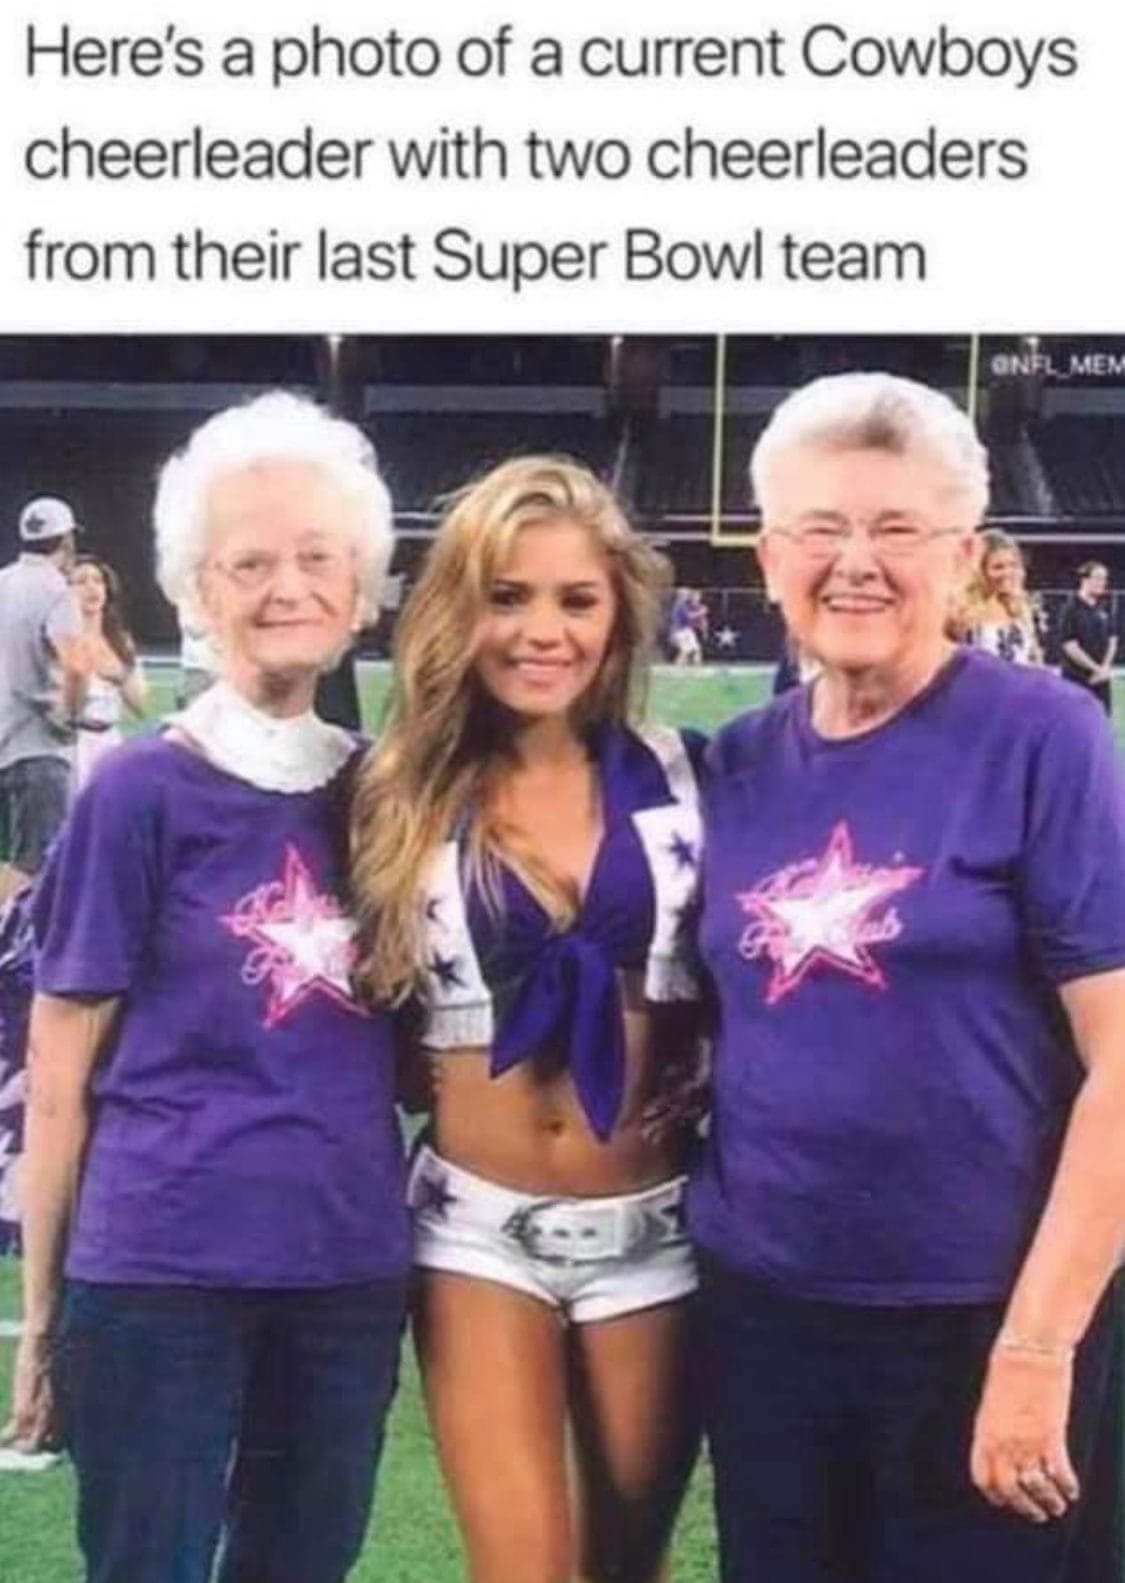 cowboys cheerleaders from last super bowl - Here's a photo of a current Cowboys cheerleader with two cheerleaders from their last Super Bowl team Onel Mem